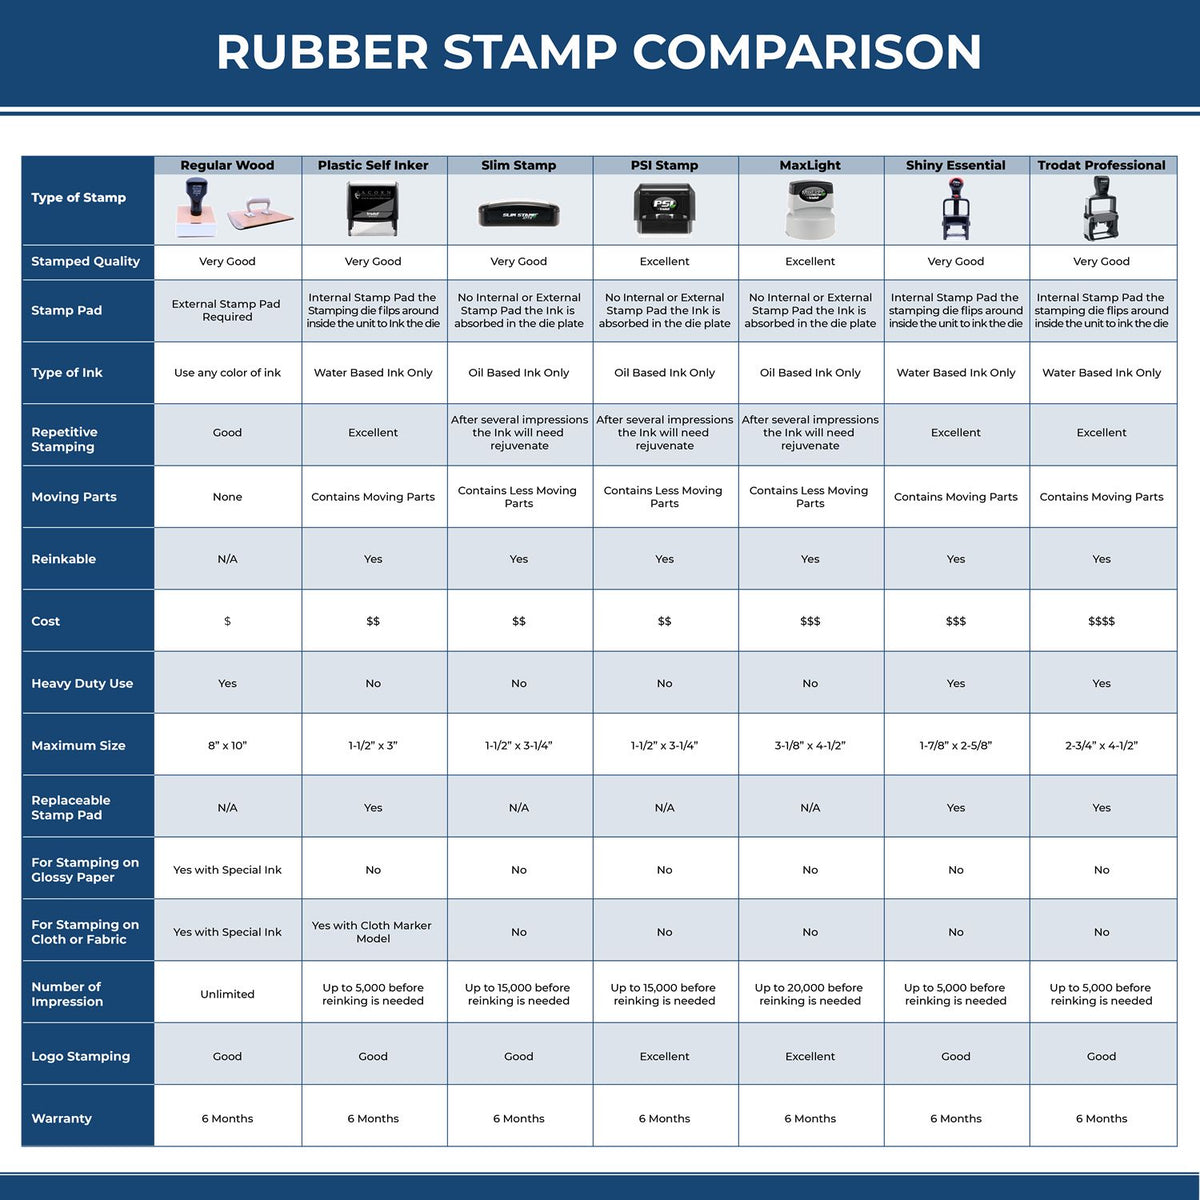 A comparison chart for the different types of mount models available for the New Jersey Professional Engineer Seal Stamp.